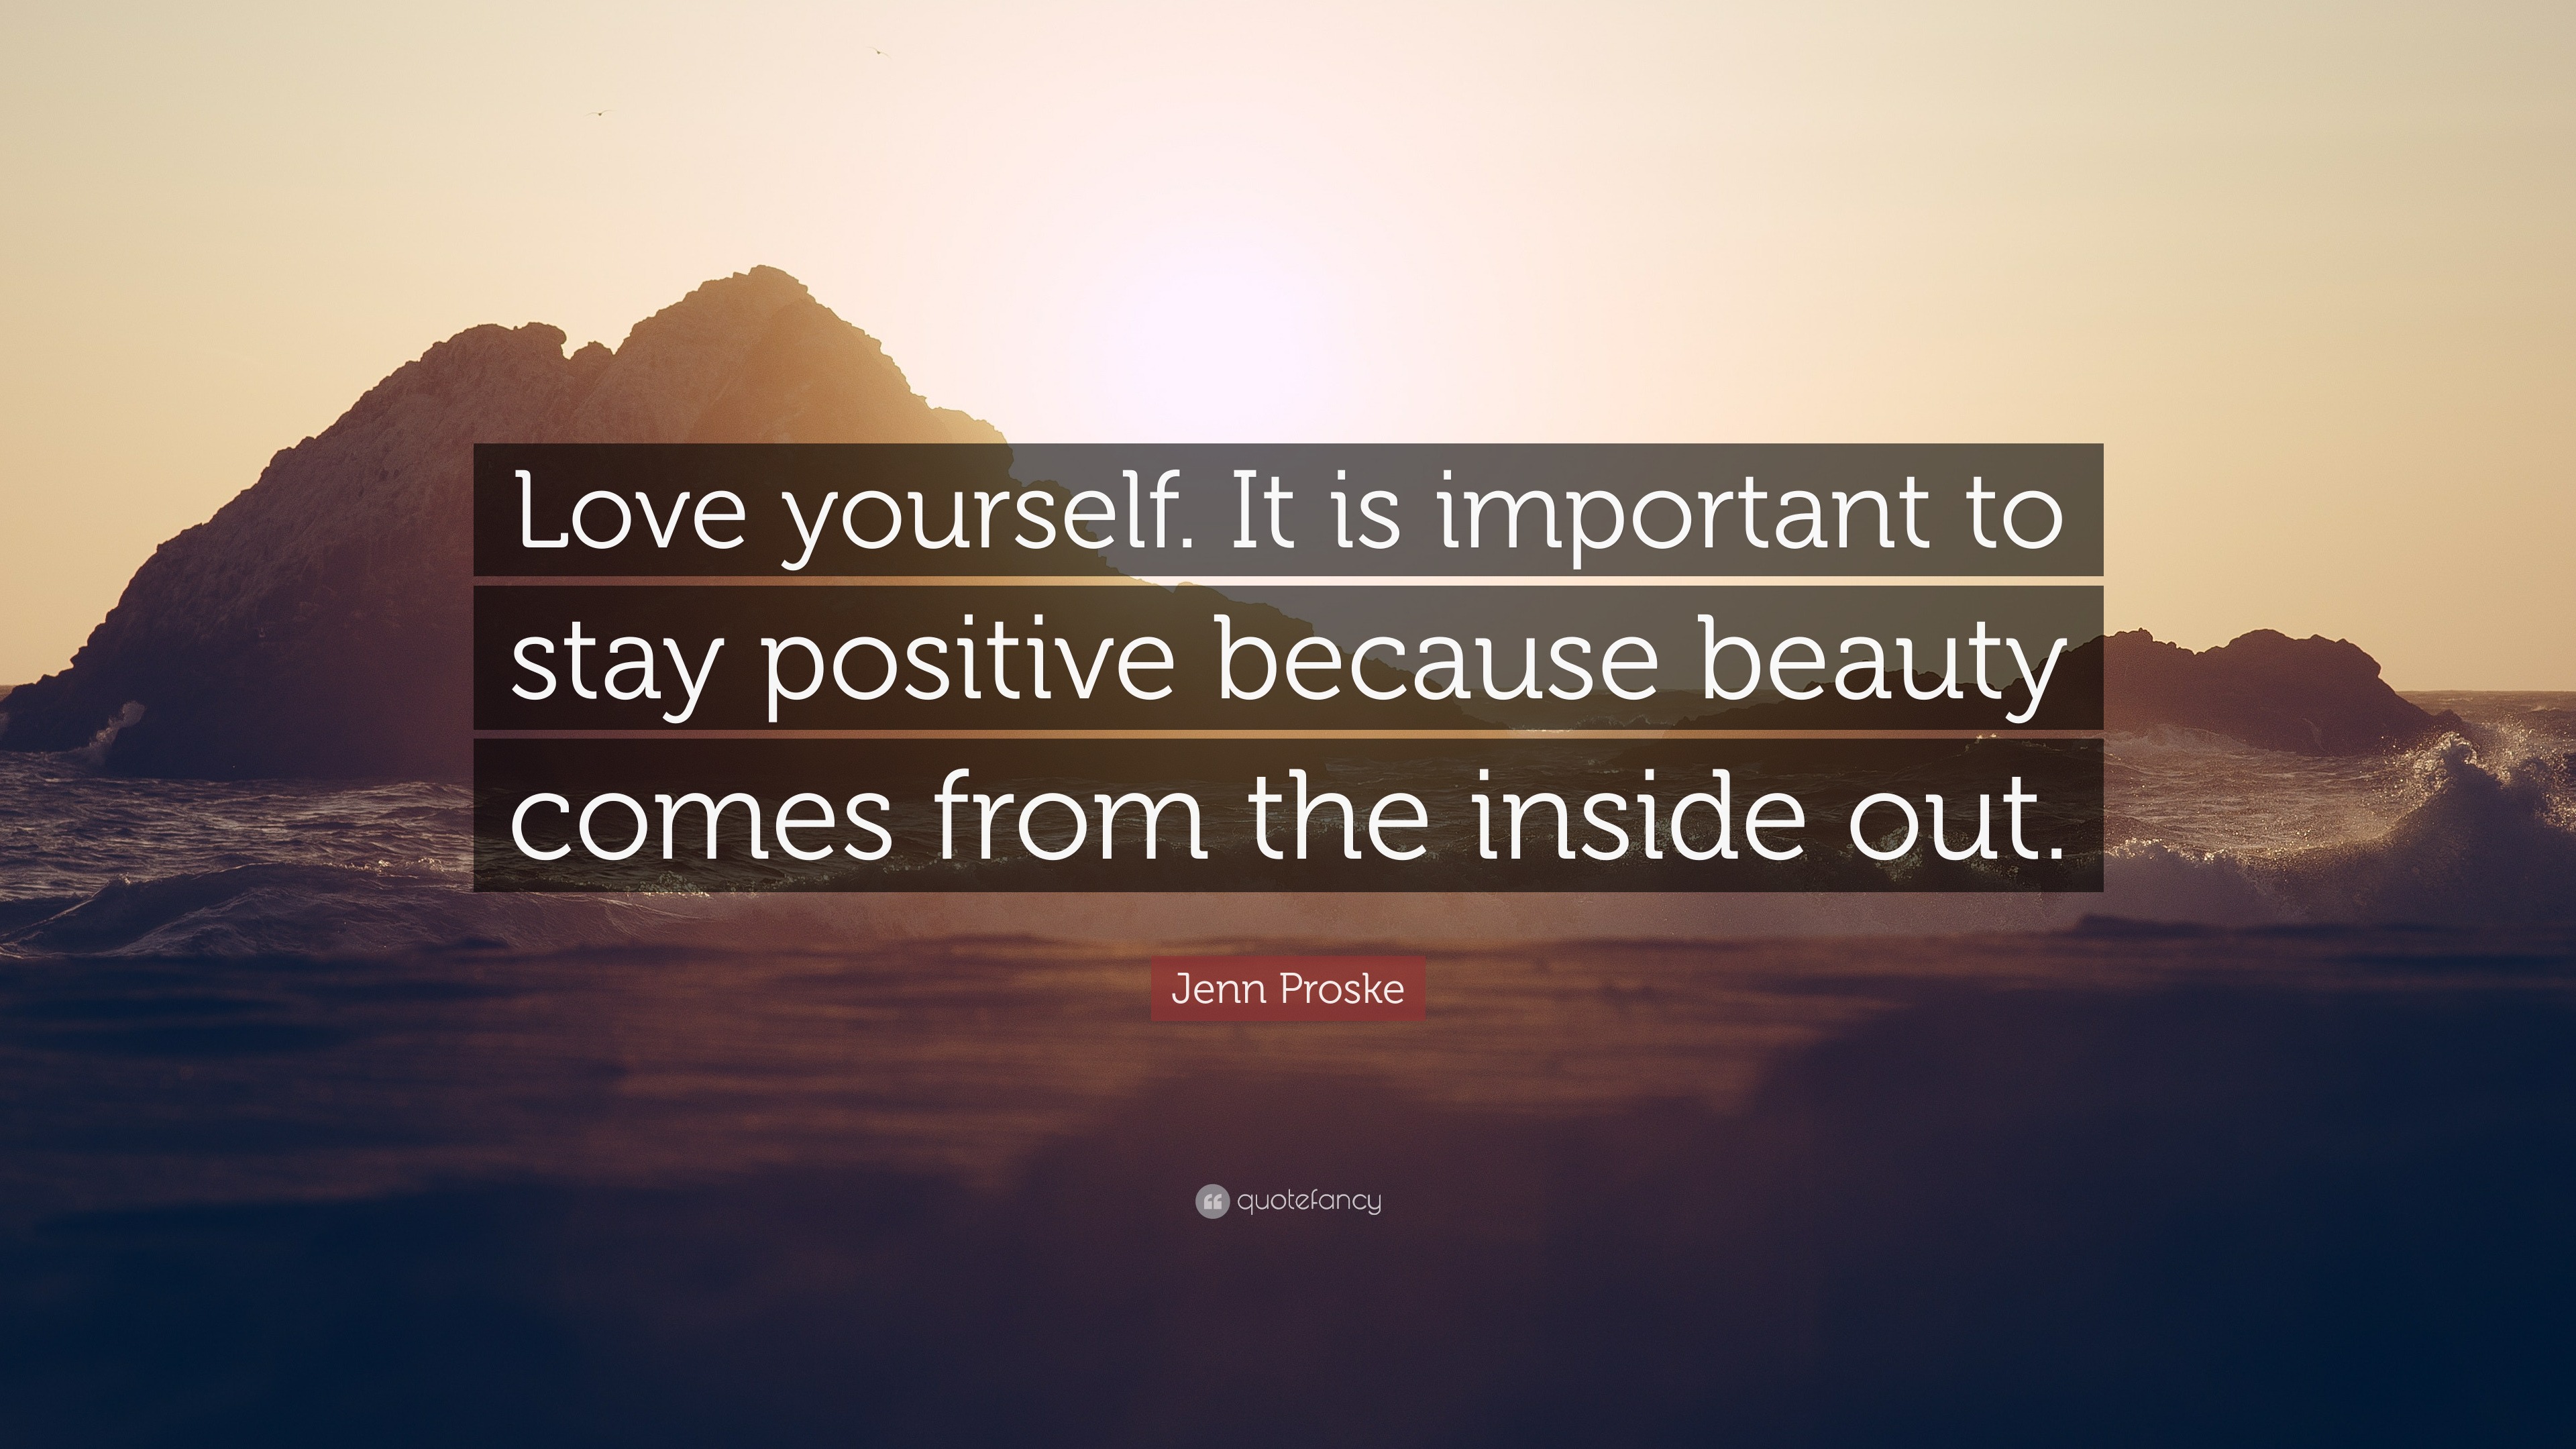 love yourself it is important to stay positive quotes